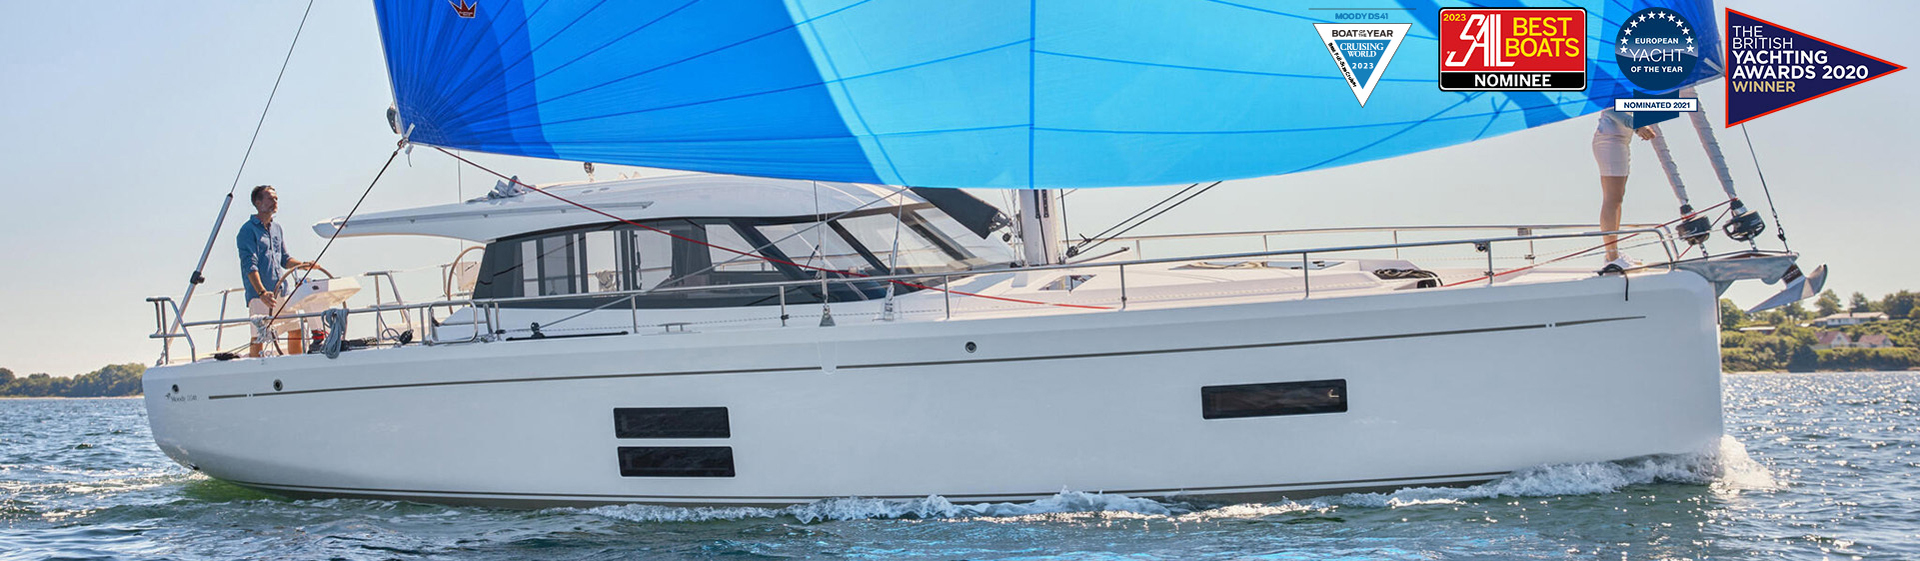 Bluewater sailboat concept from Moody yachts